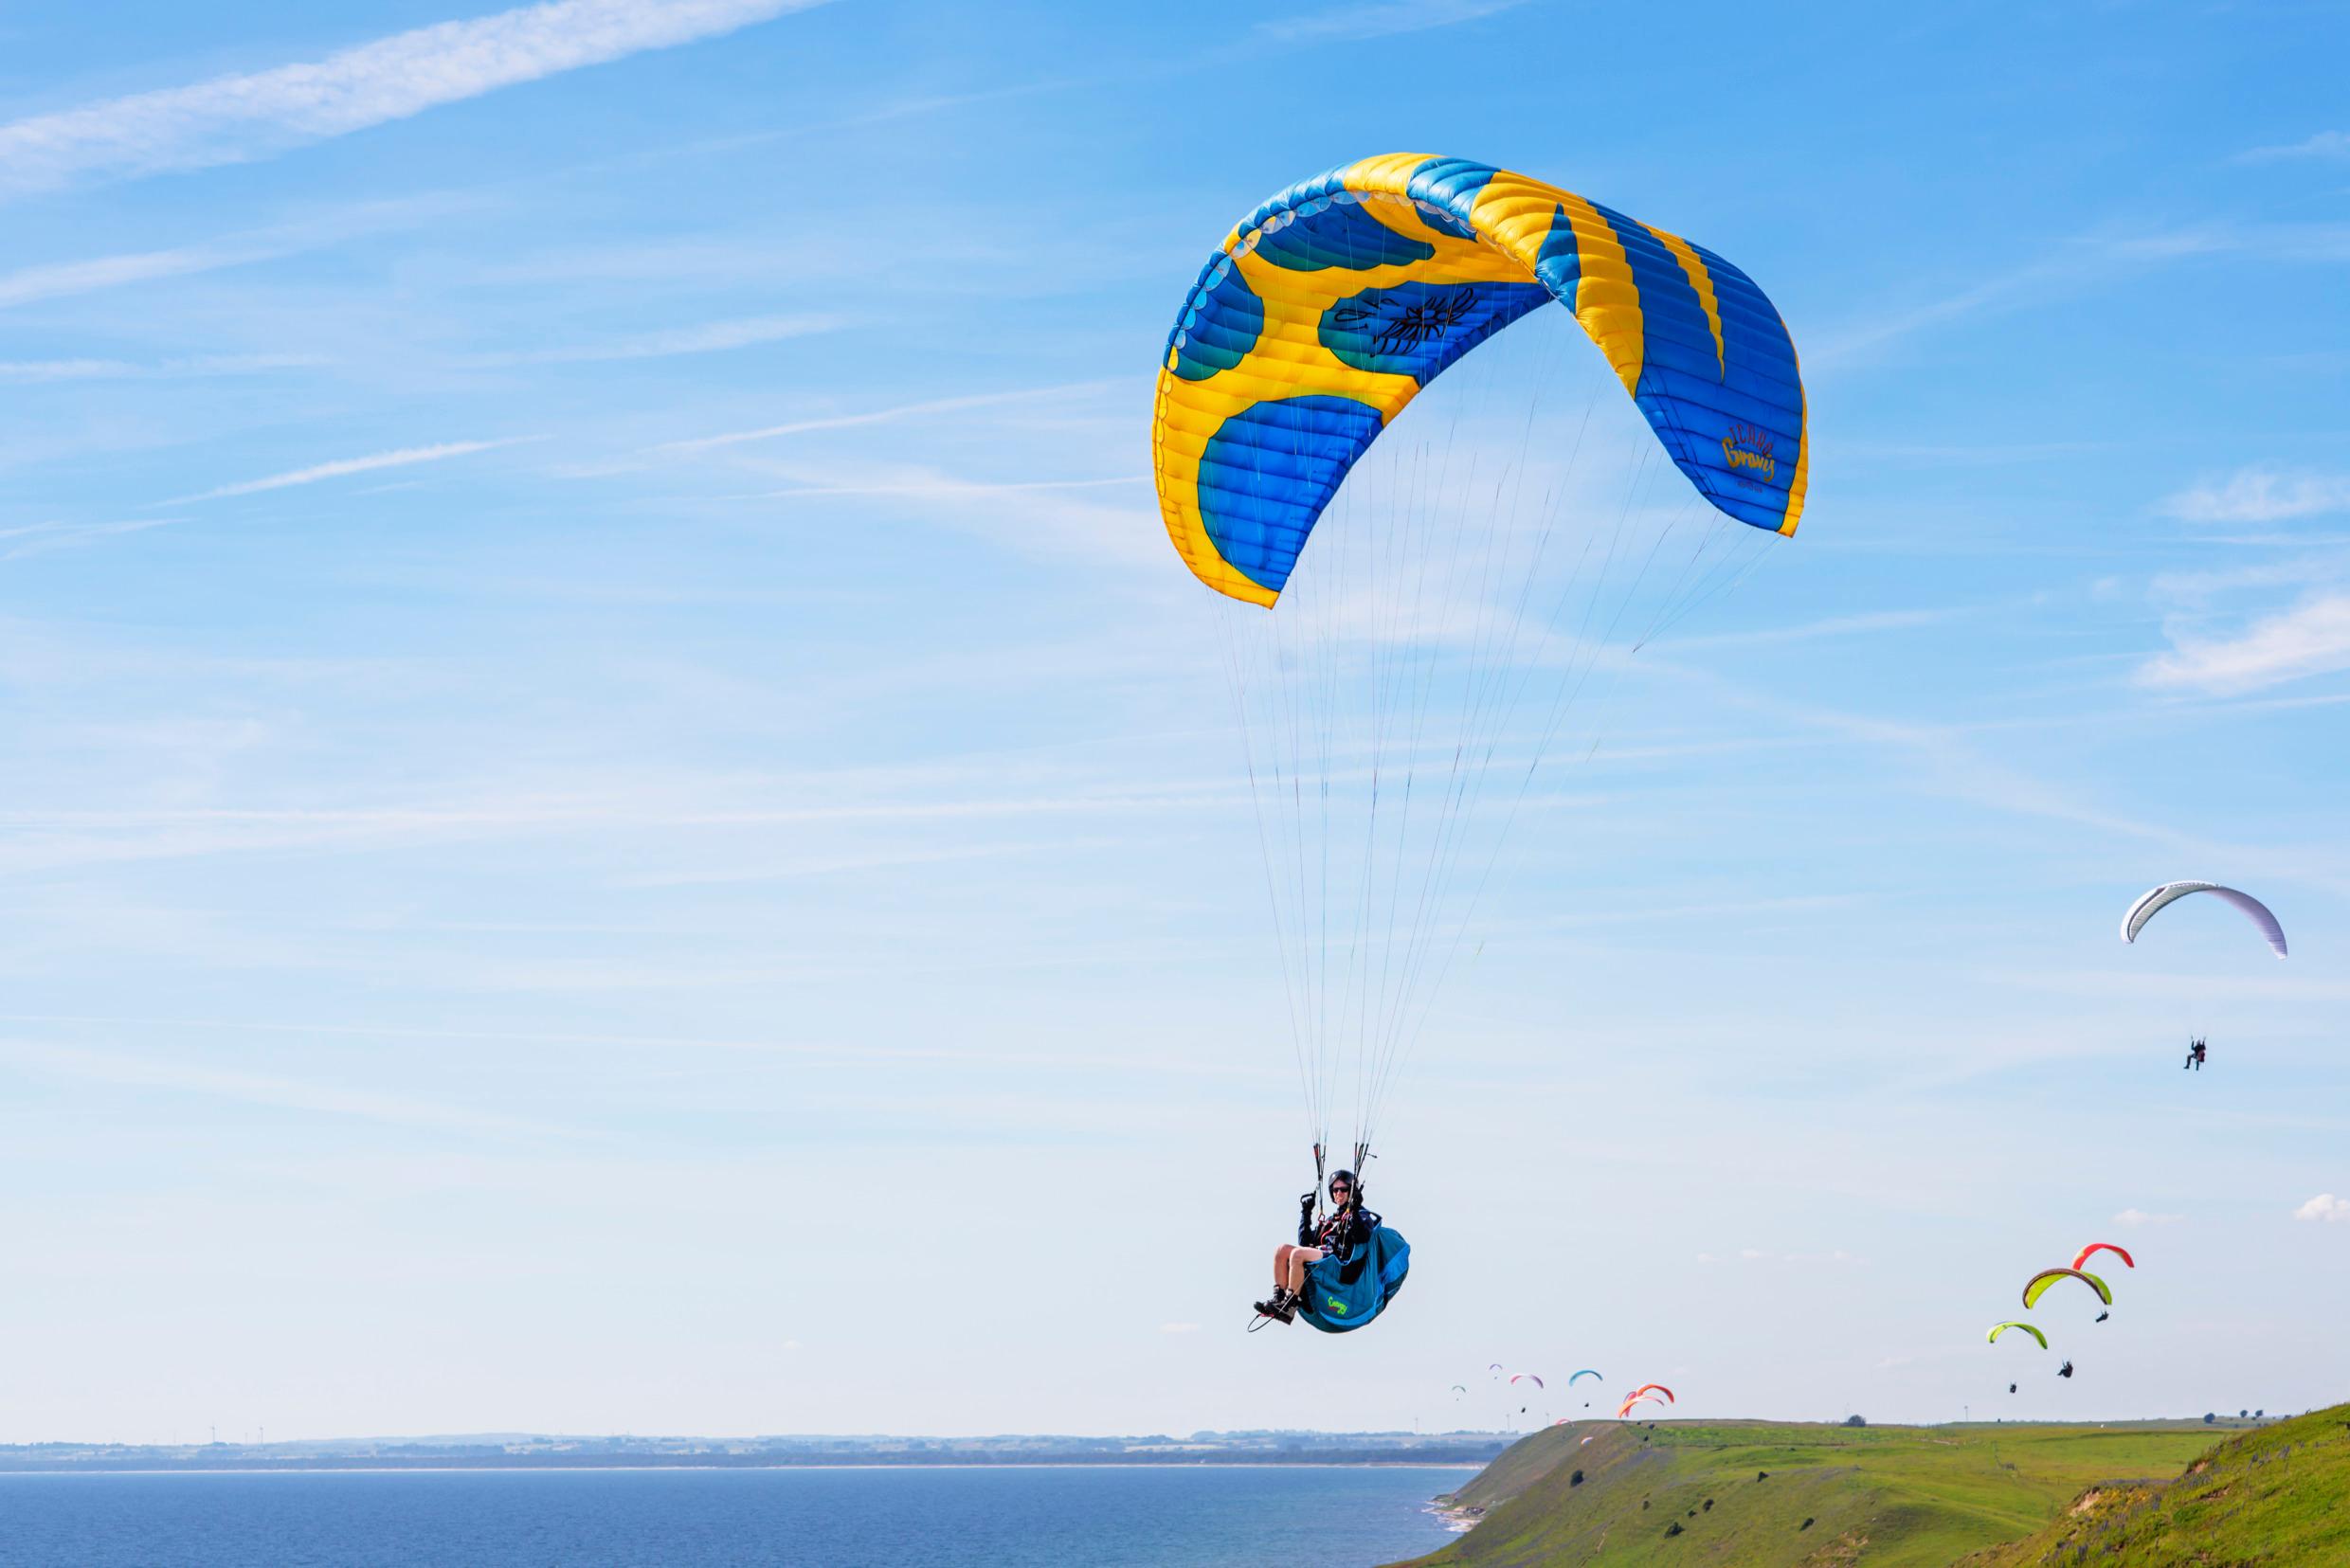 A person paragliding with a yellow-and-blue parachute above the sea. Other paragliders in the background.